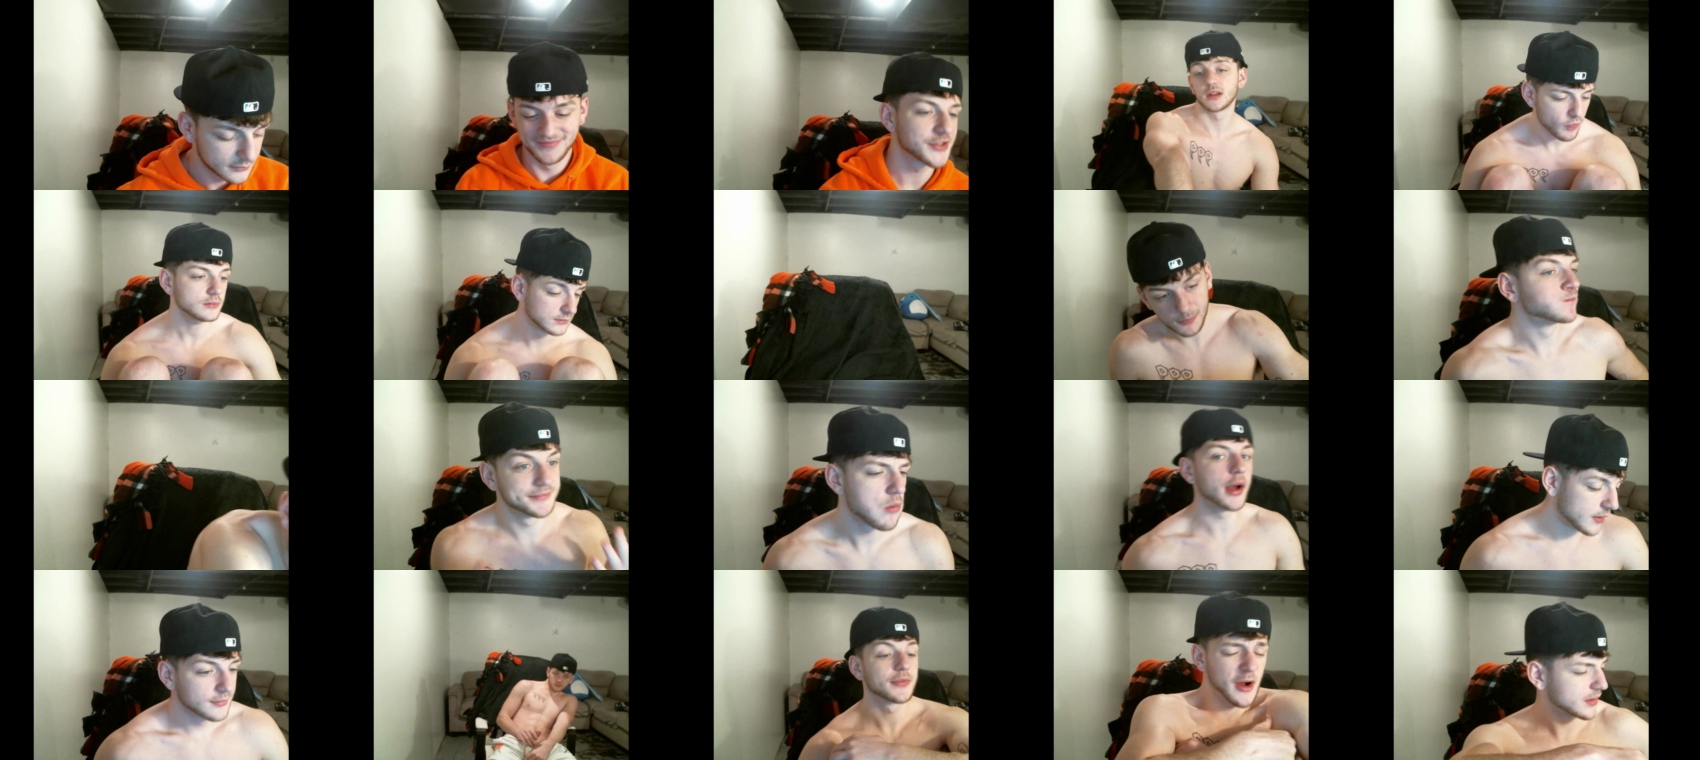 sexylax69 kiss CAM SHOW @ Chaturbate 19-01-2022